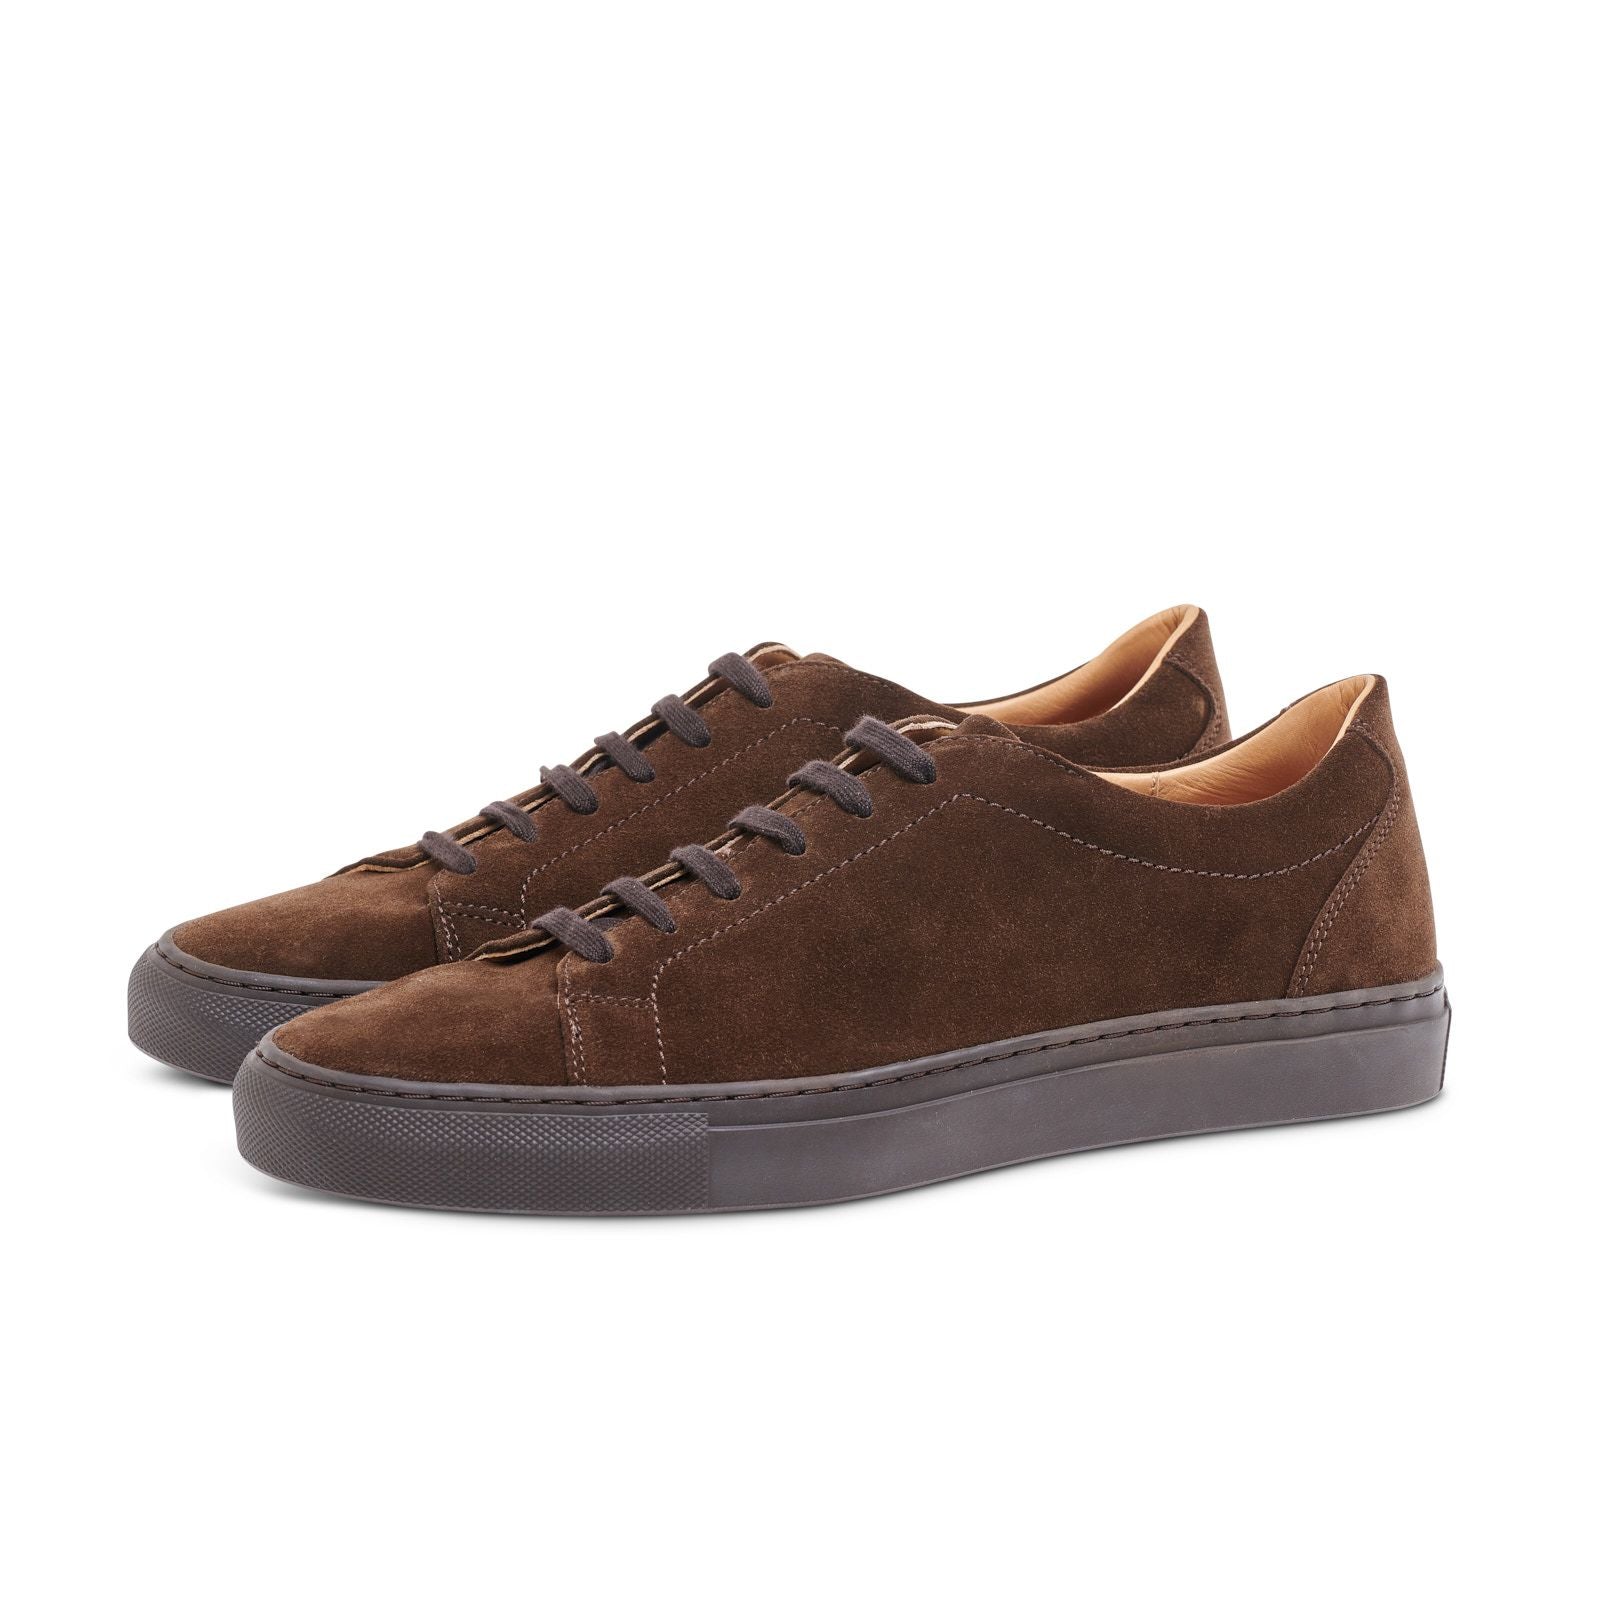 An expertly crafted, durable and supremely comfortable dark brown / green suede leather trainer from Ludwig Reiter with leather lining and non slip soles for an all-purpose and utterly stylish piece of contemporary footwear.